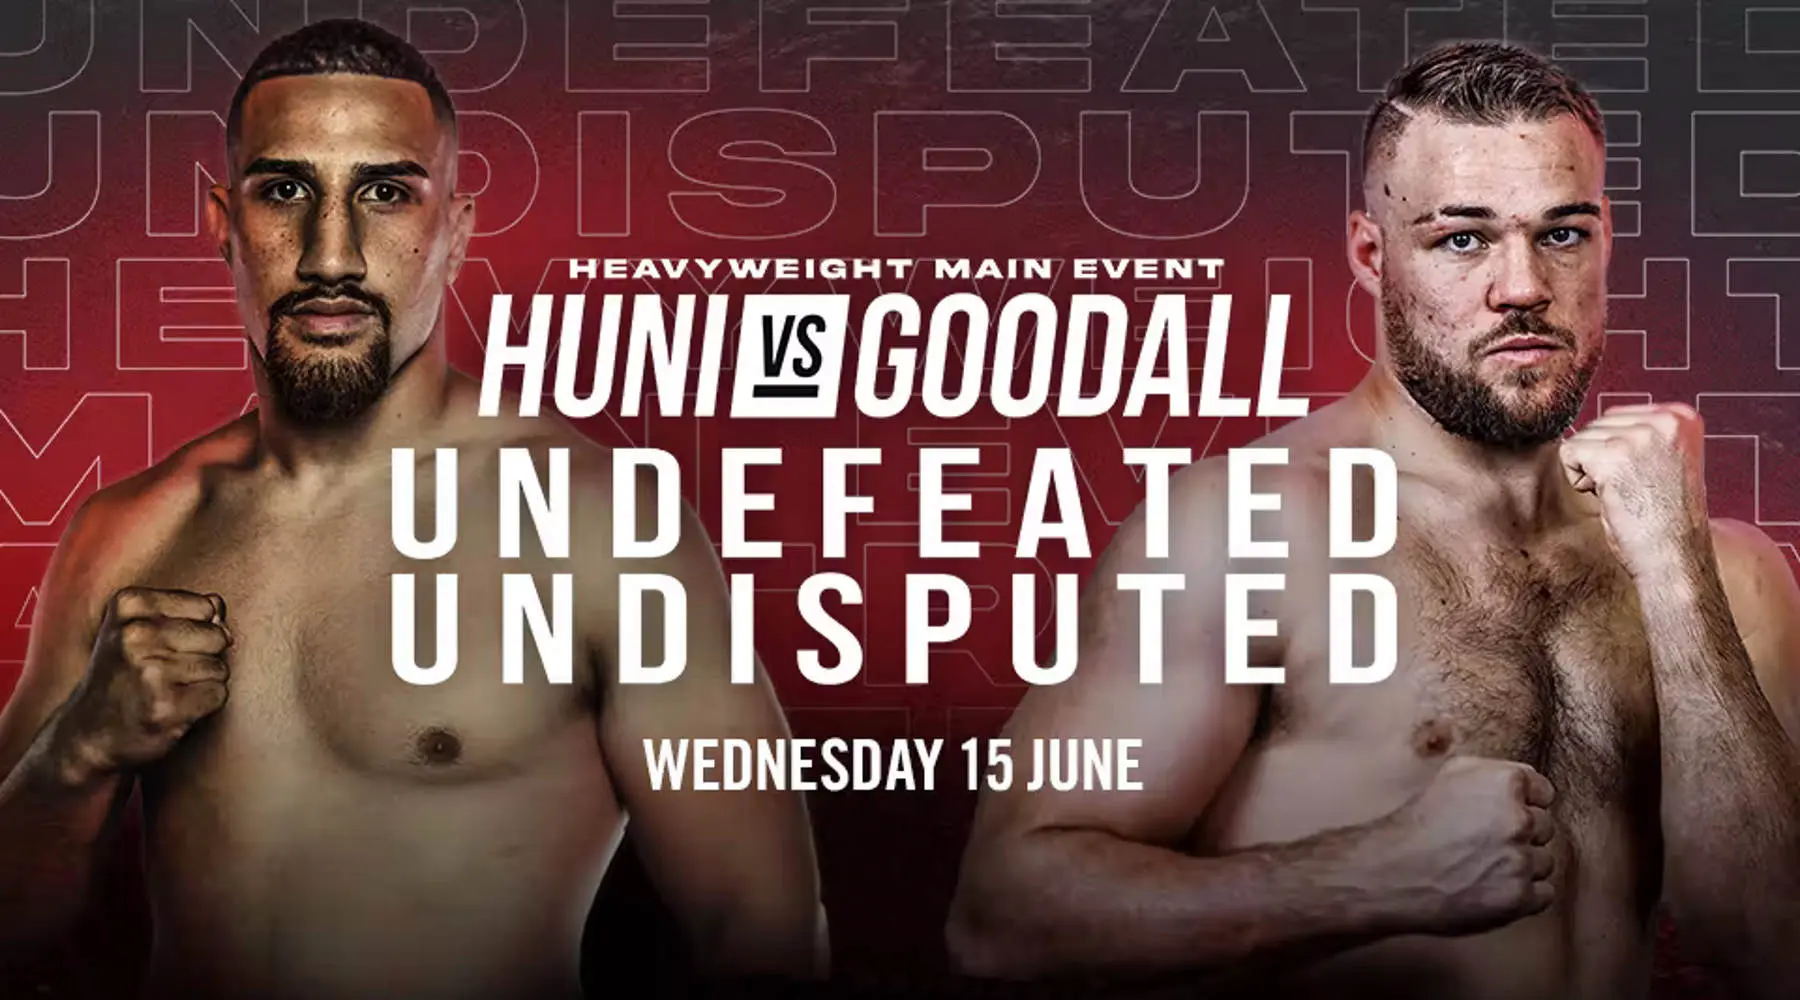 How to watch Justis Huni vs Joseph Goodall boxing live online